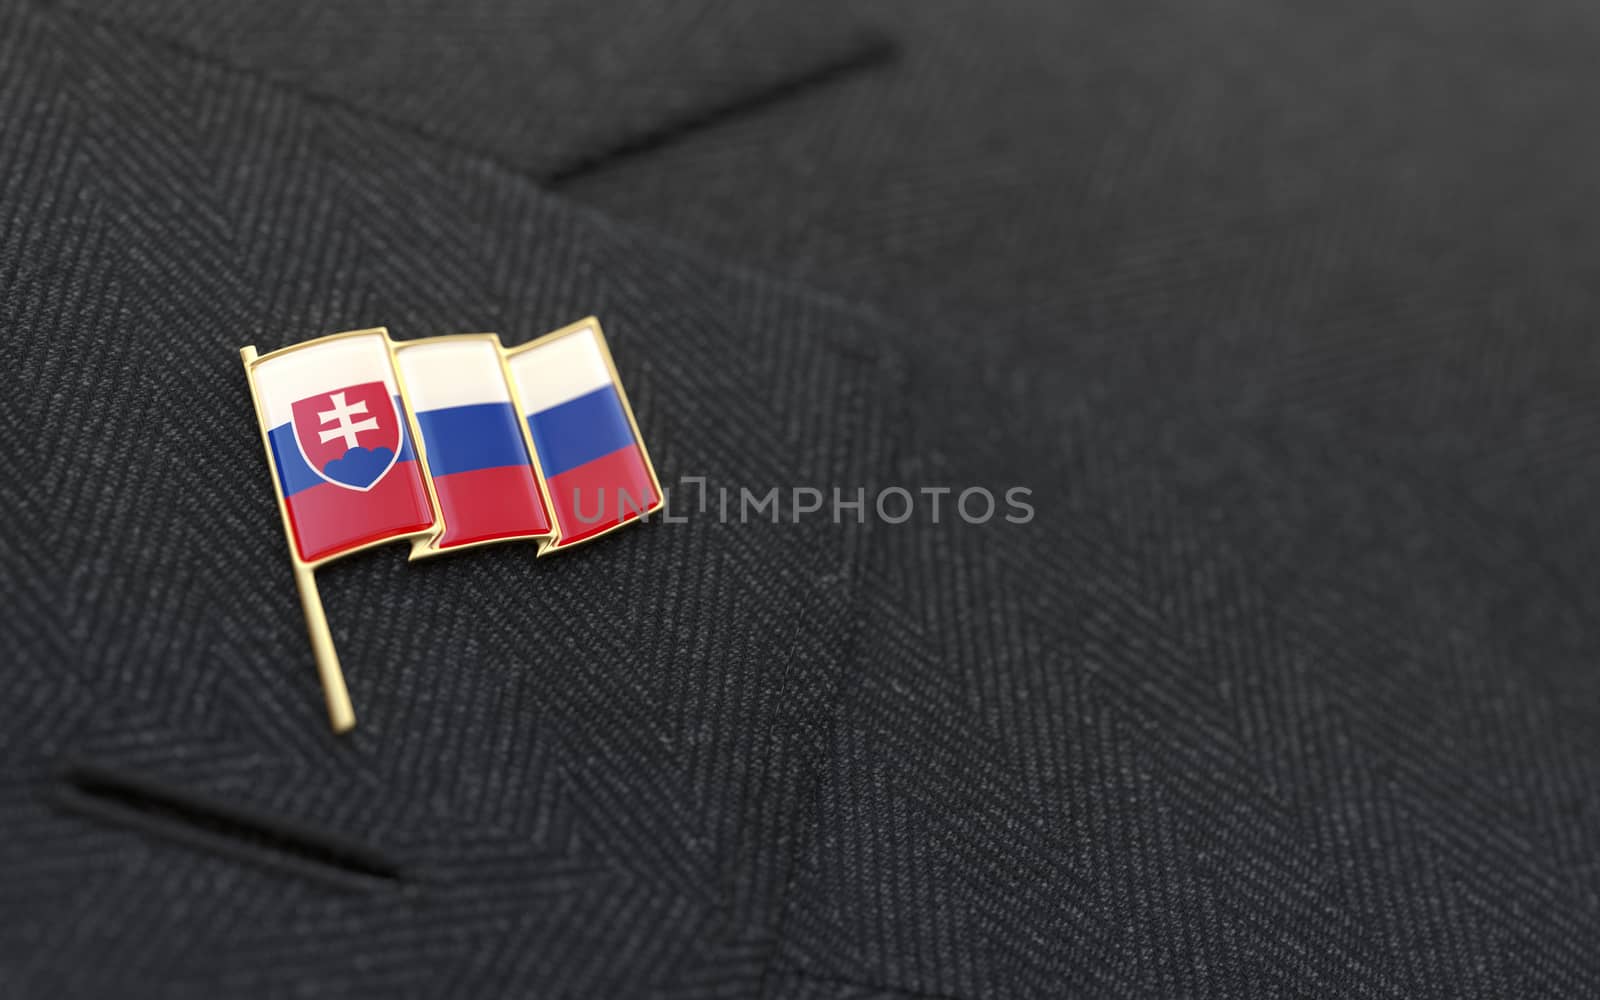 Slovakia flag lapel pin on the collar of a business suit jacket shows patriotism